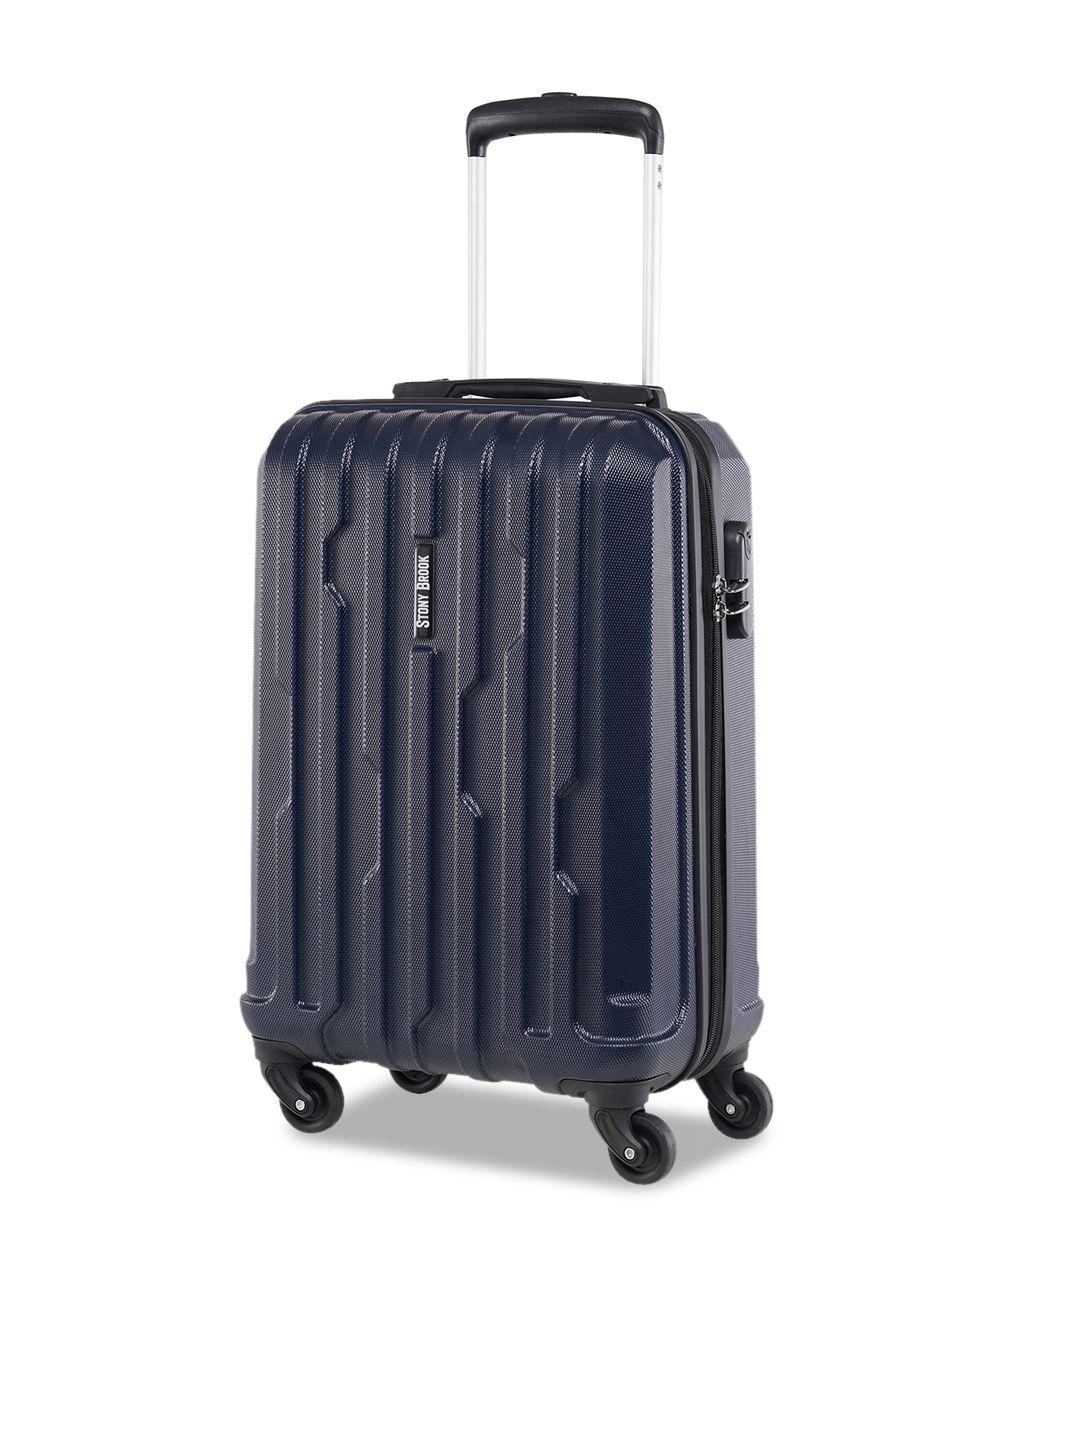 stony brook by nasher miles storm hard-sided cabin trolley suitcase